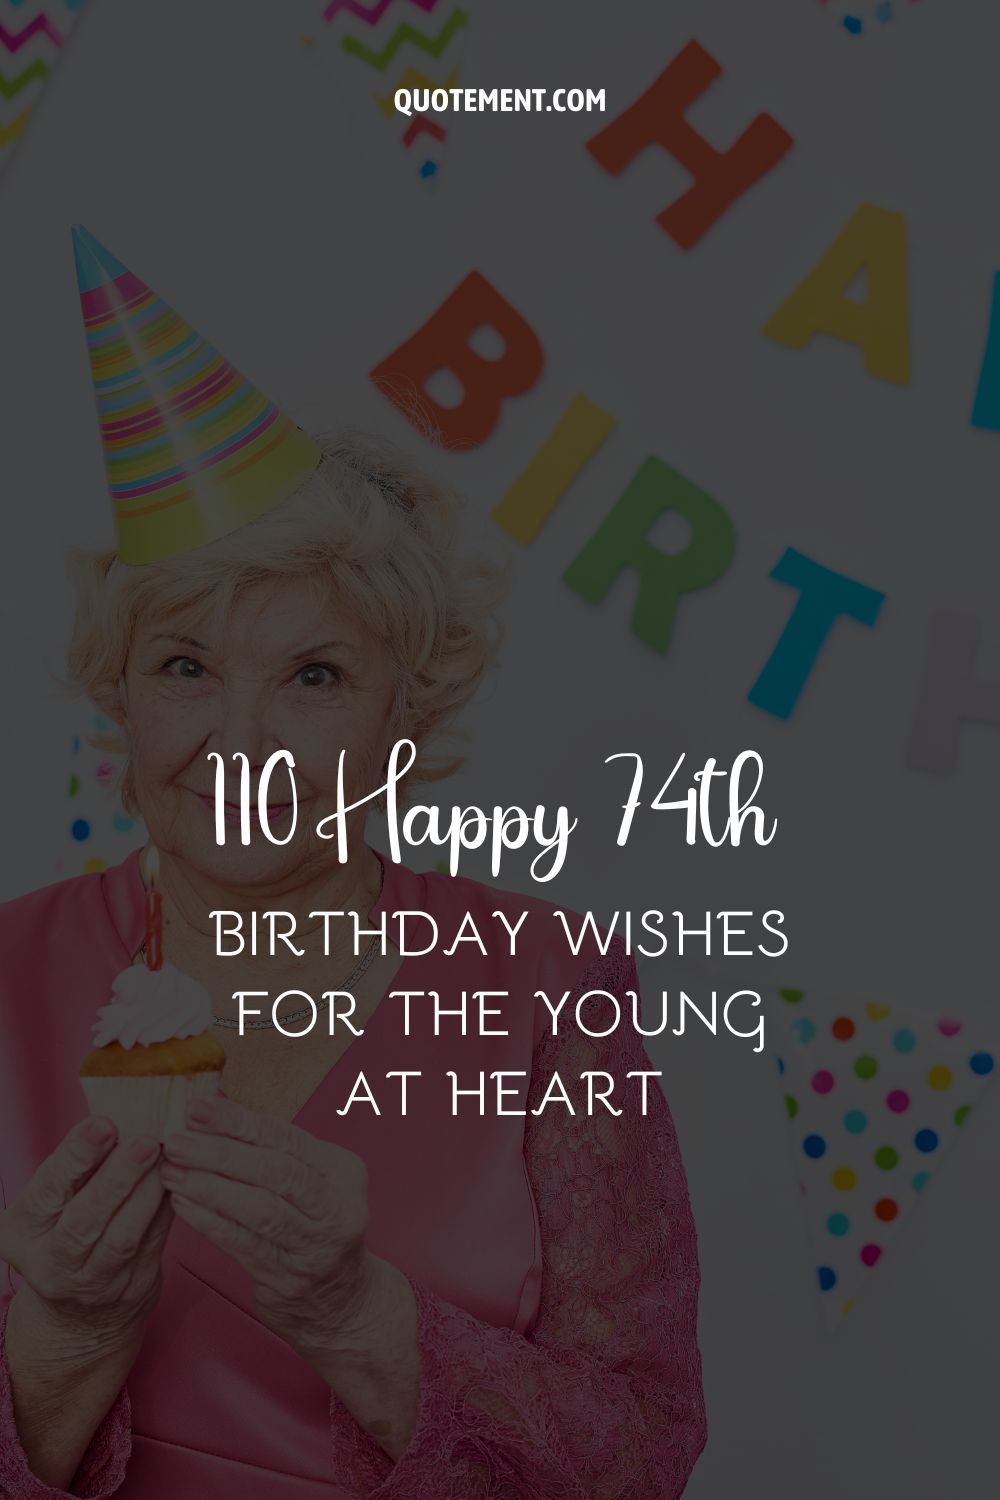 110 Happy 74th Birthday Wishes For The Young At Heart 